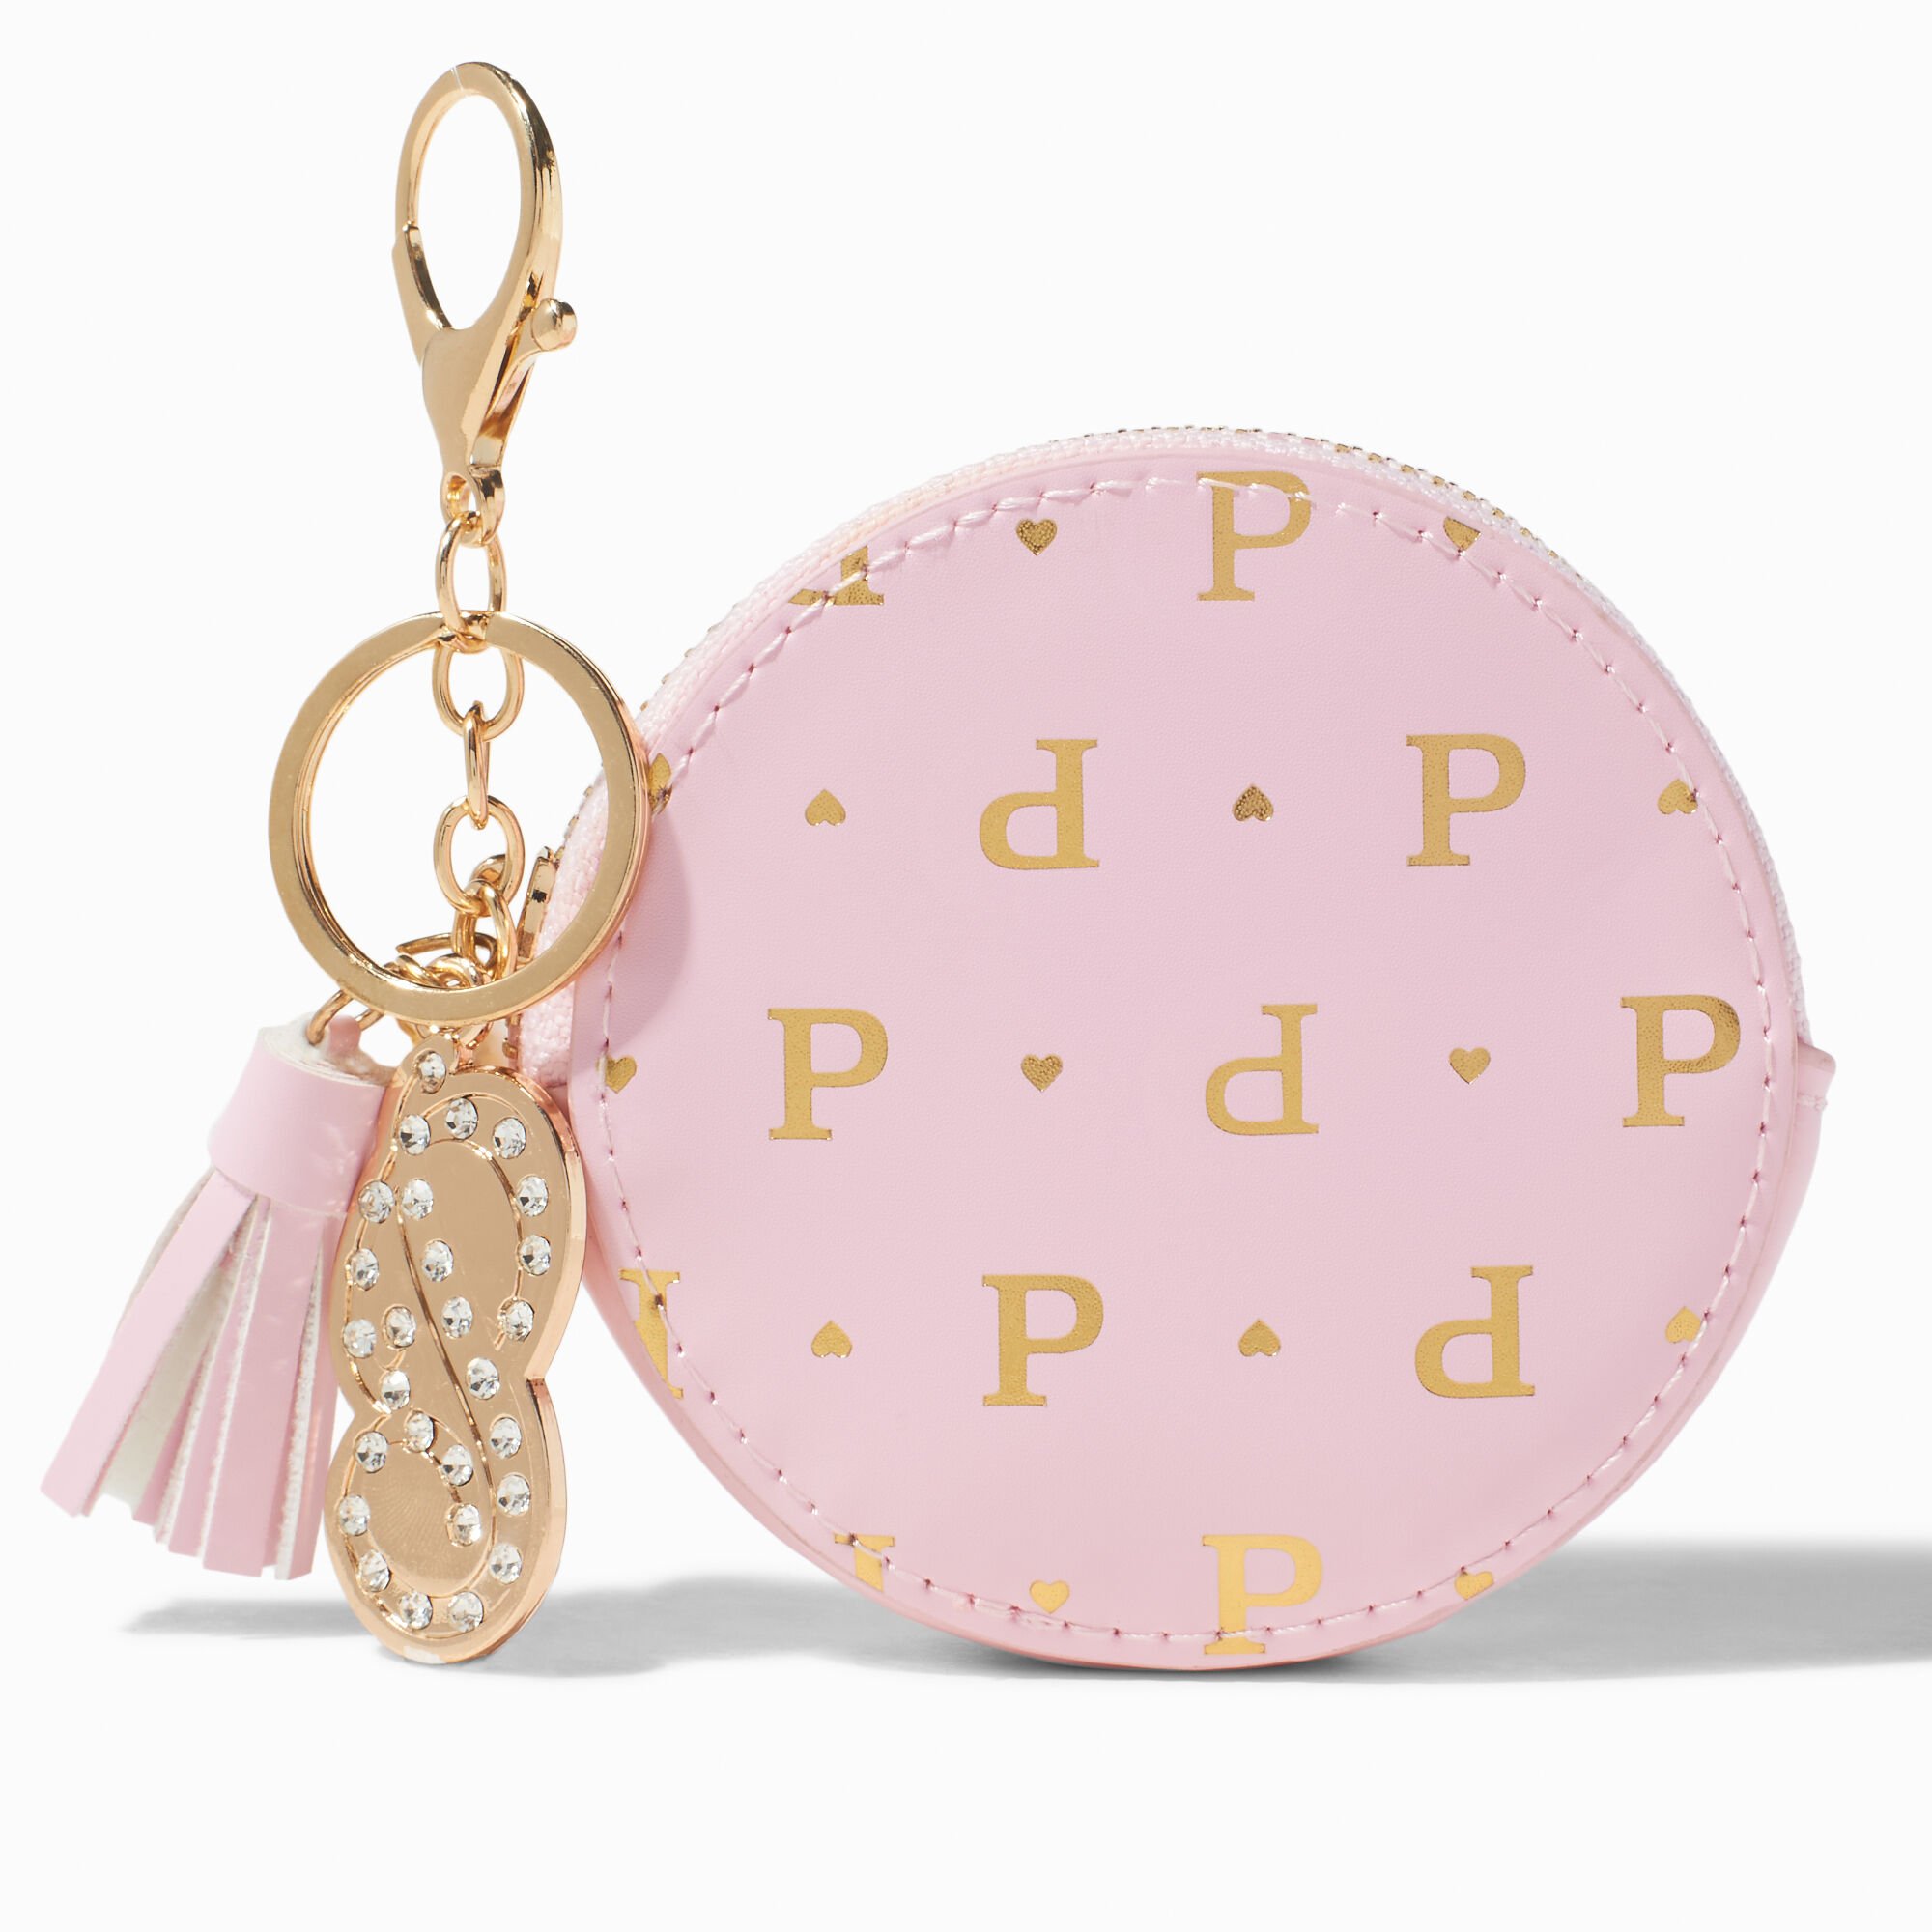 View Claires en Initial Coin Purse P Gold information